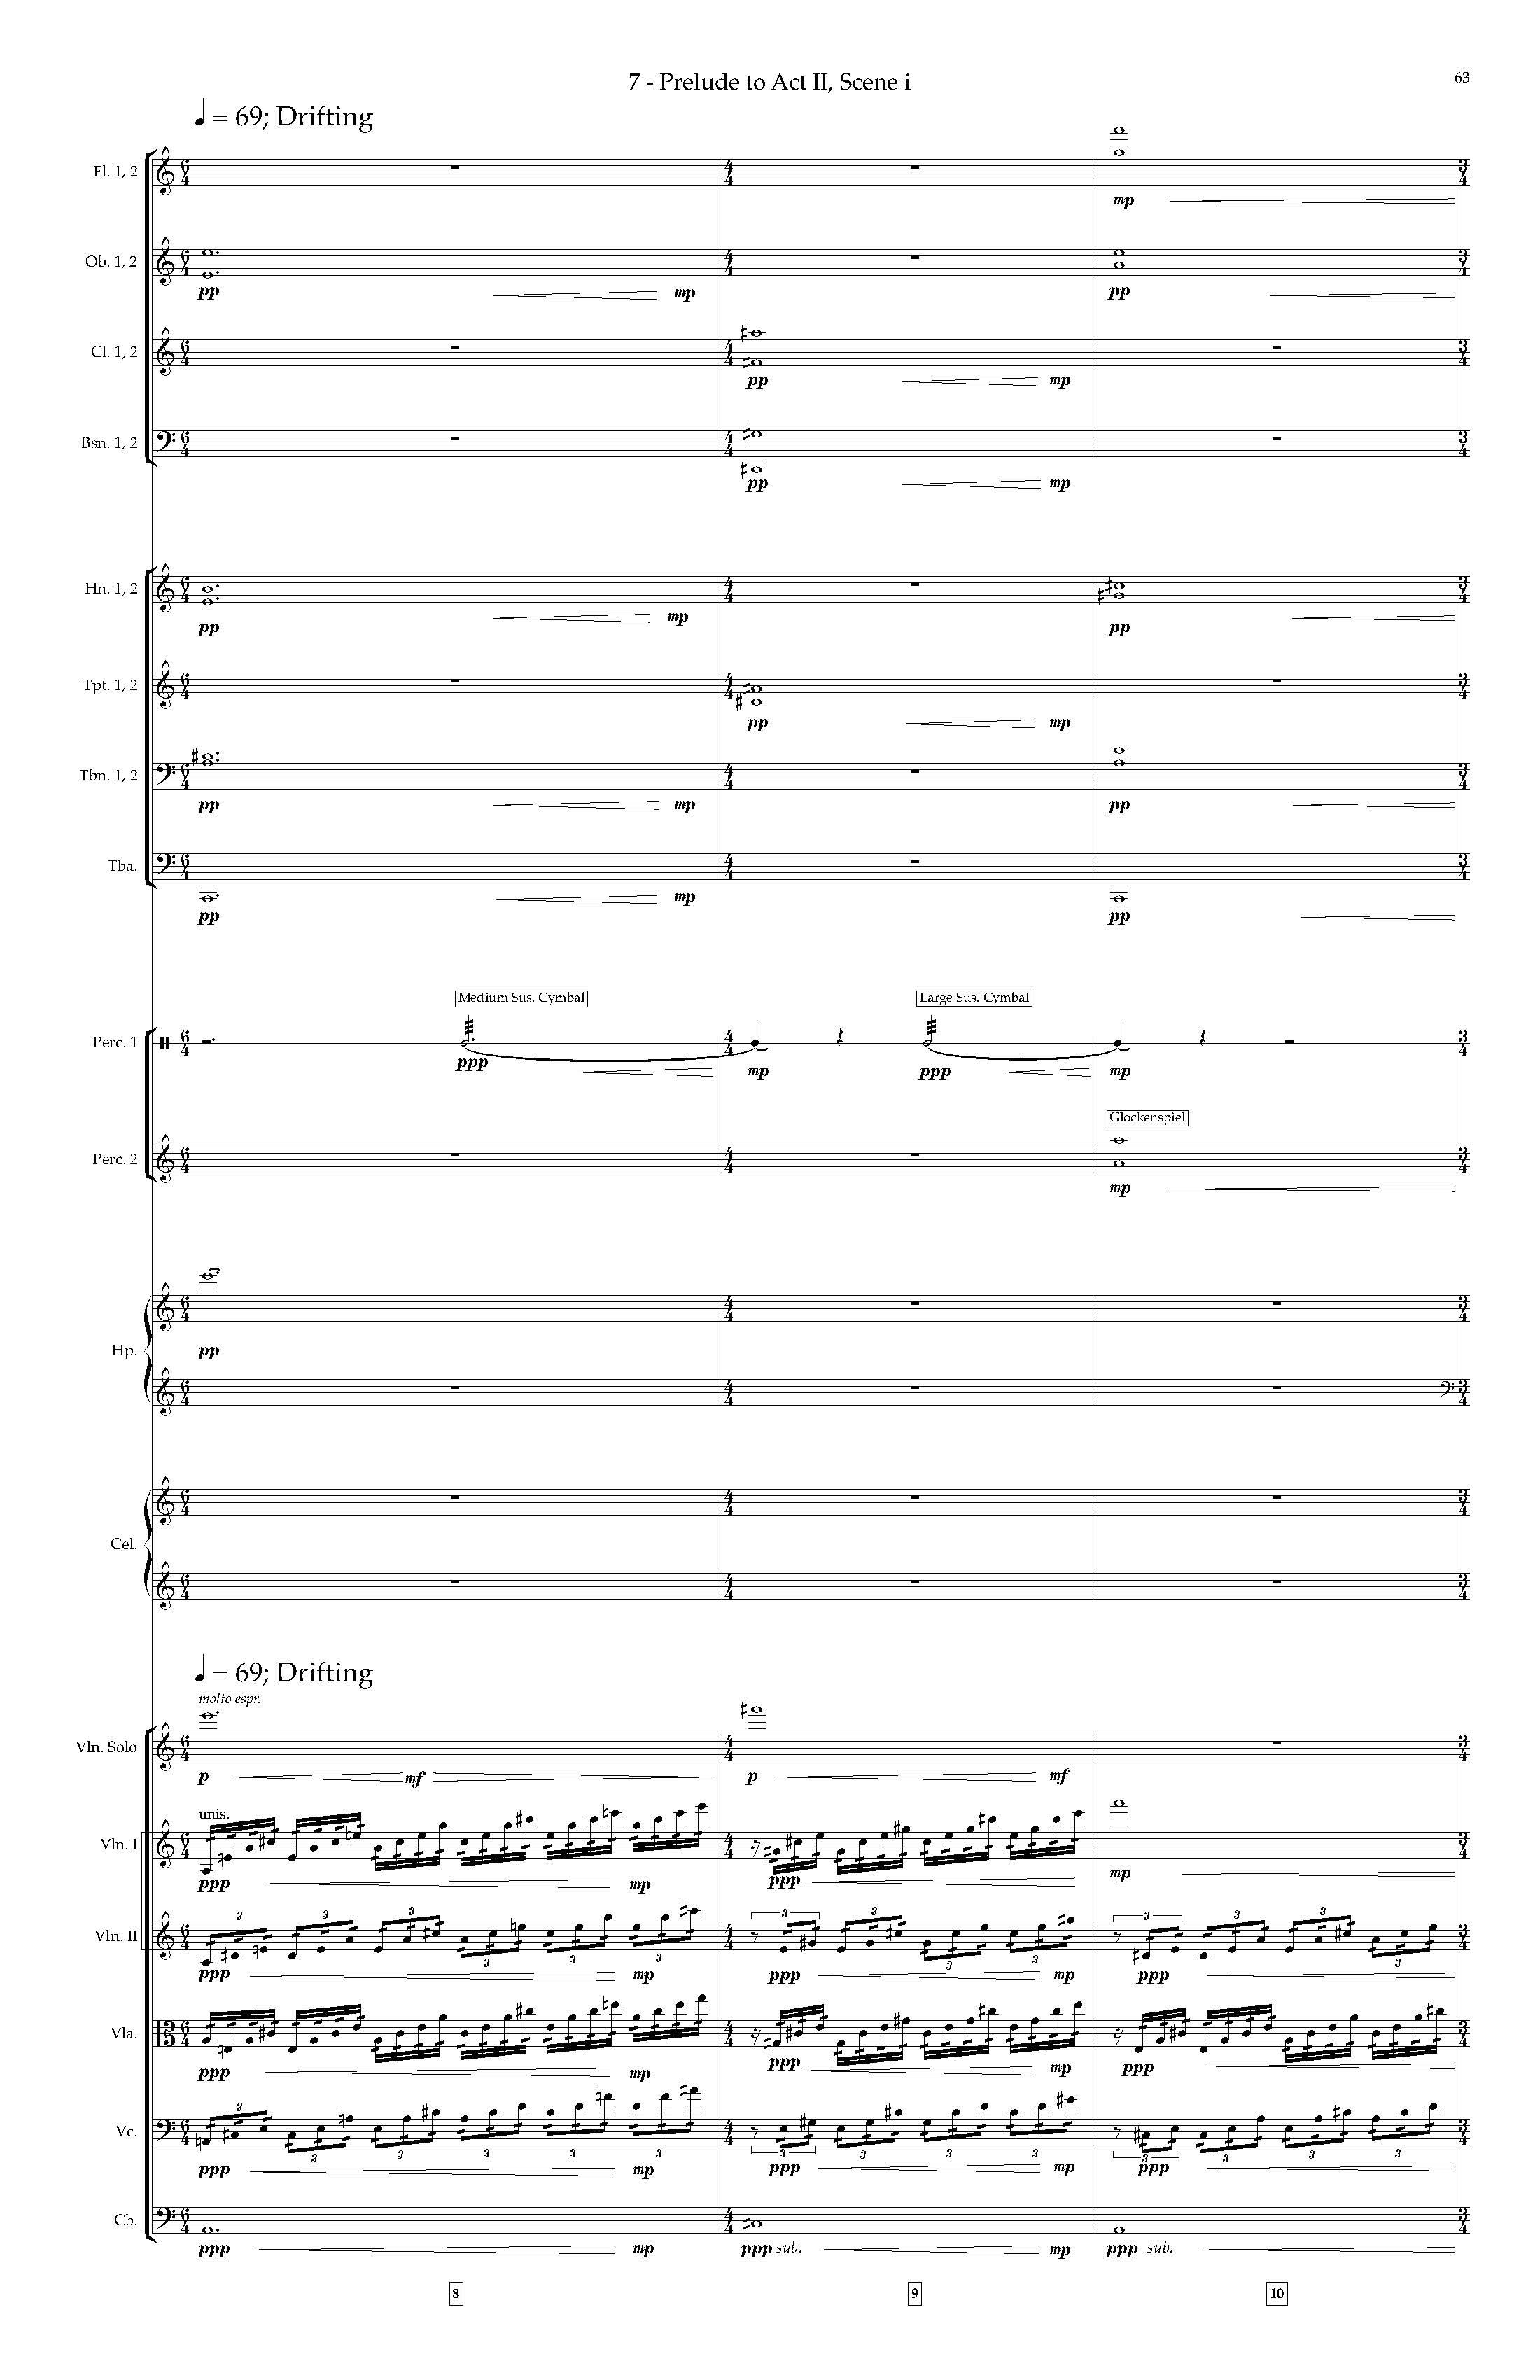 Arias and Interludes from HWGS - Complete Score_Page_69.jpg